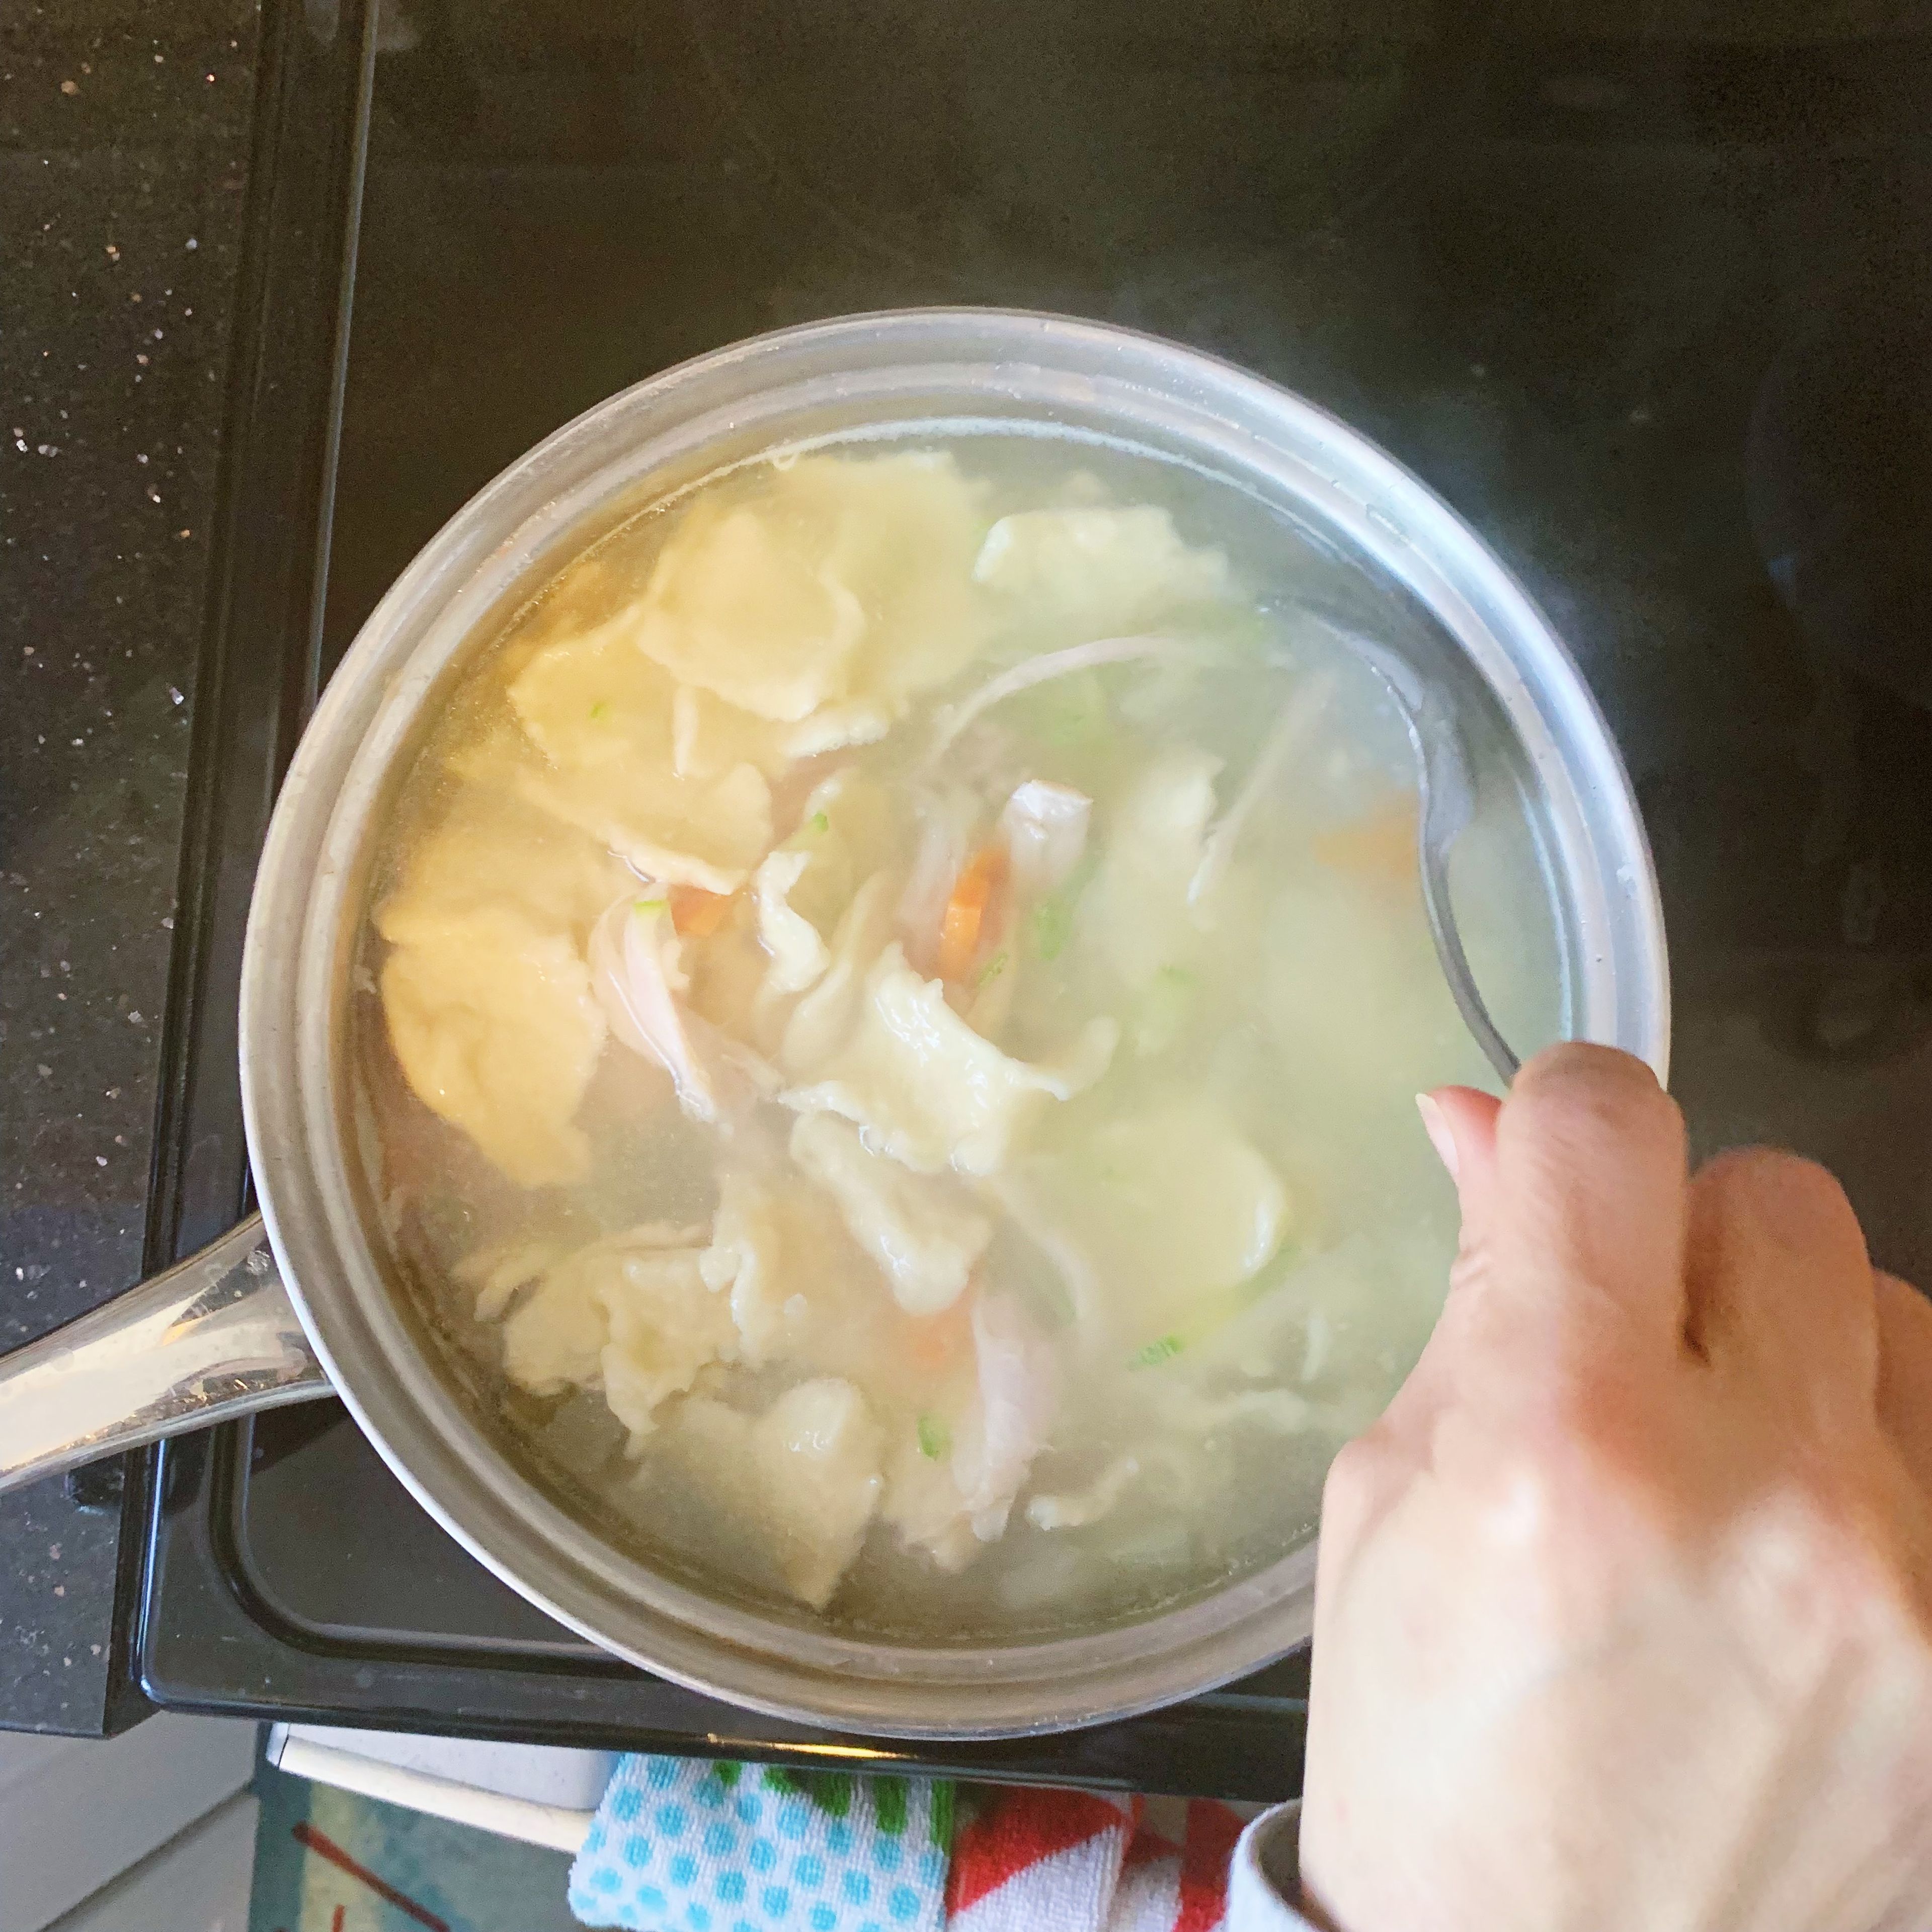 When the soup is boiling, take out a noodle and try it. If it’s chewy and put together, your soup is done!